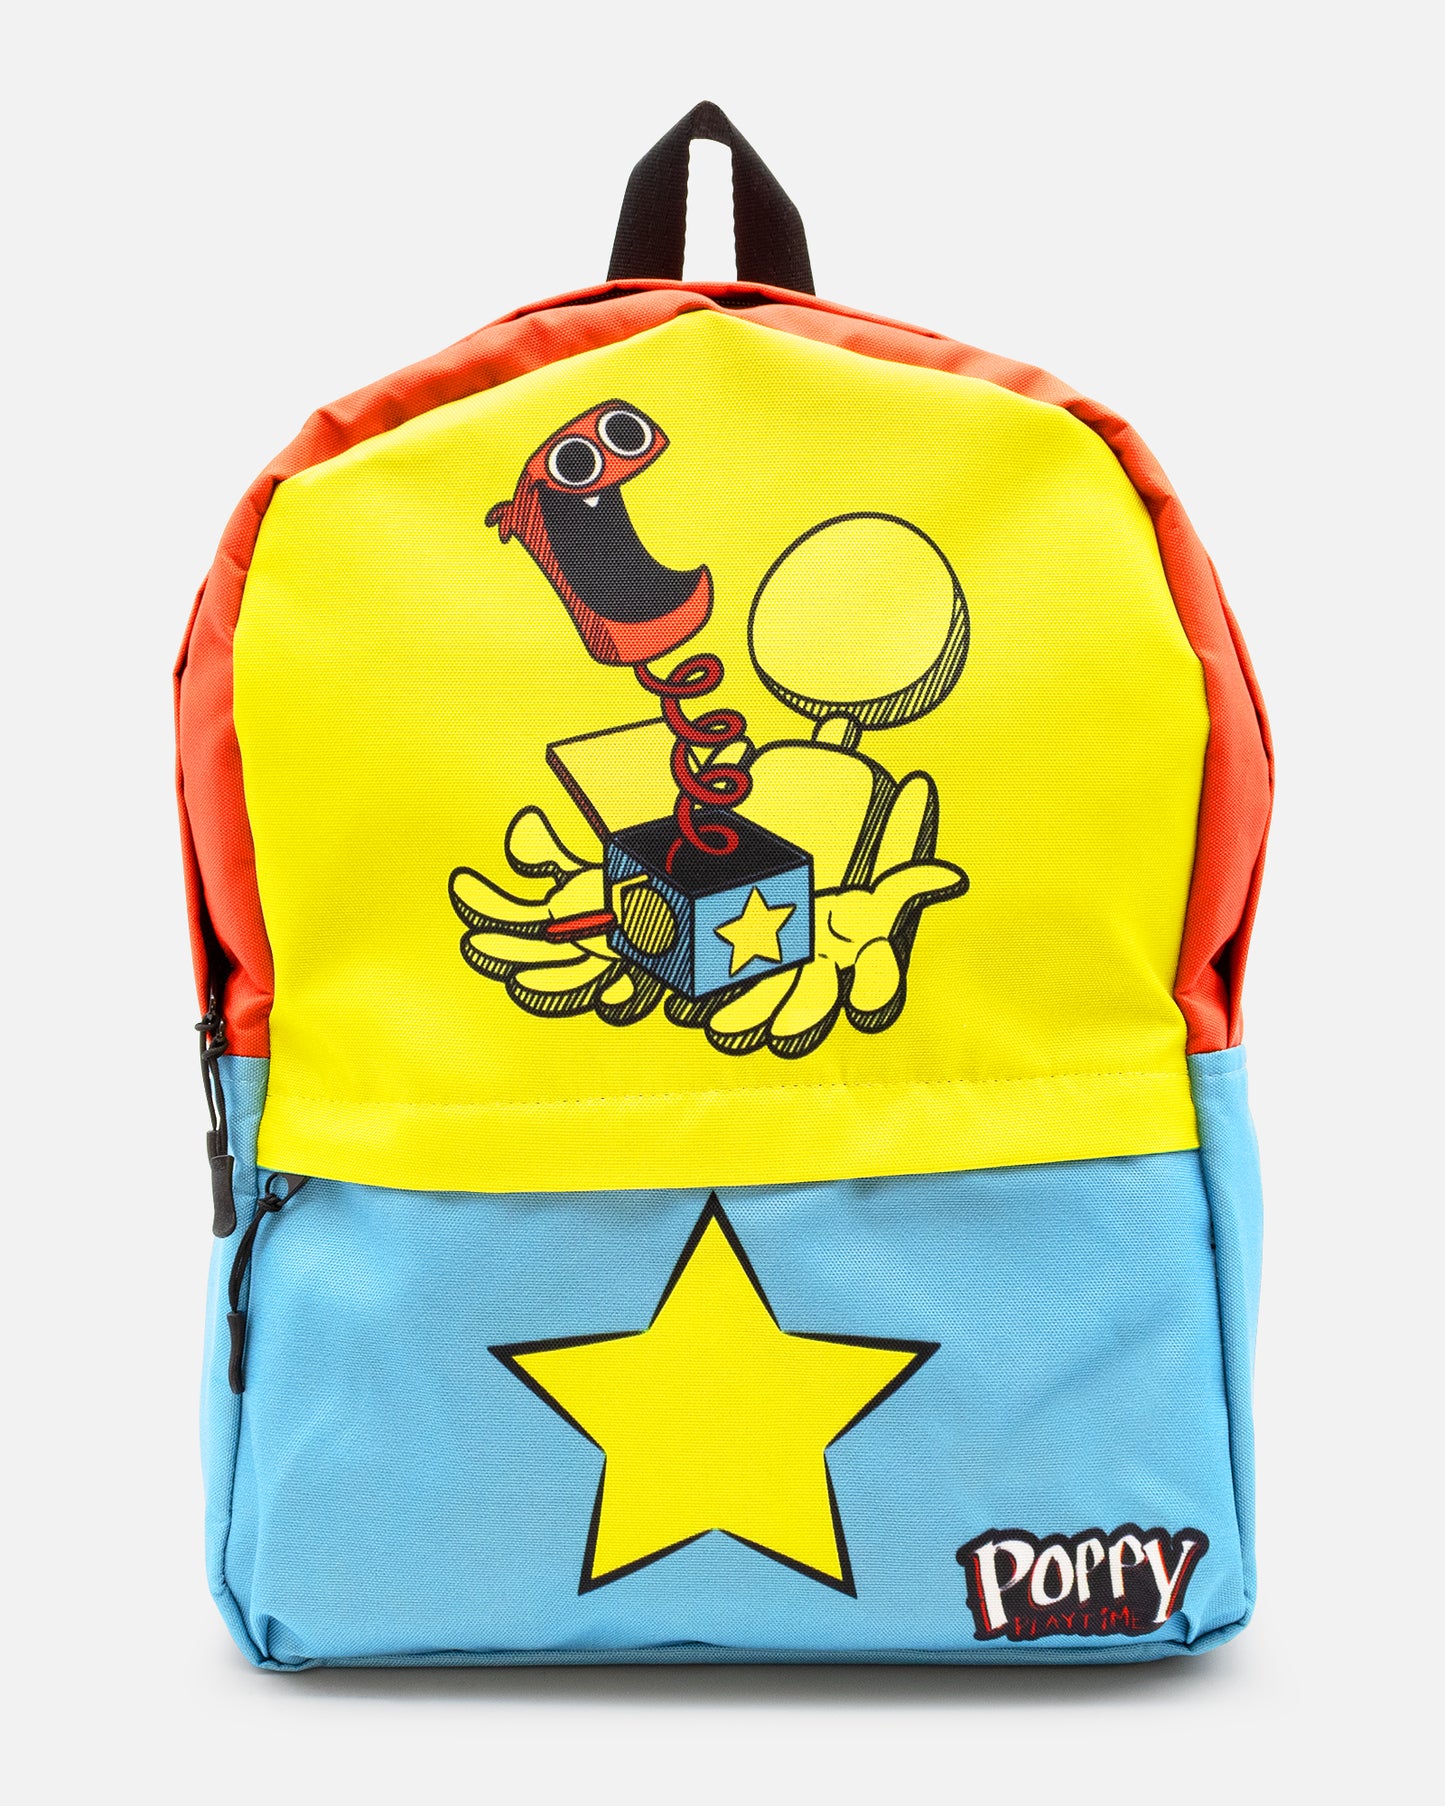 boxy boo backpack front. image on top portion: player character holding boxy boo toy. image on bottom portion: star. text: poppy playtime